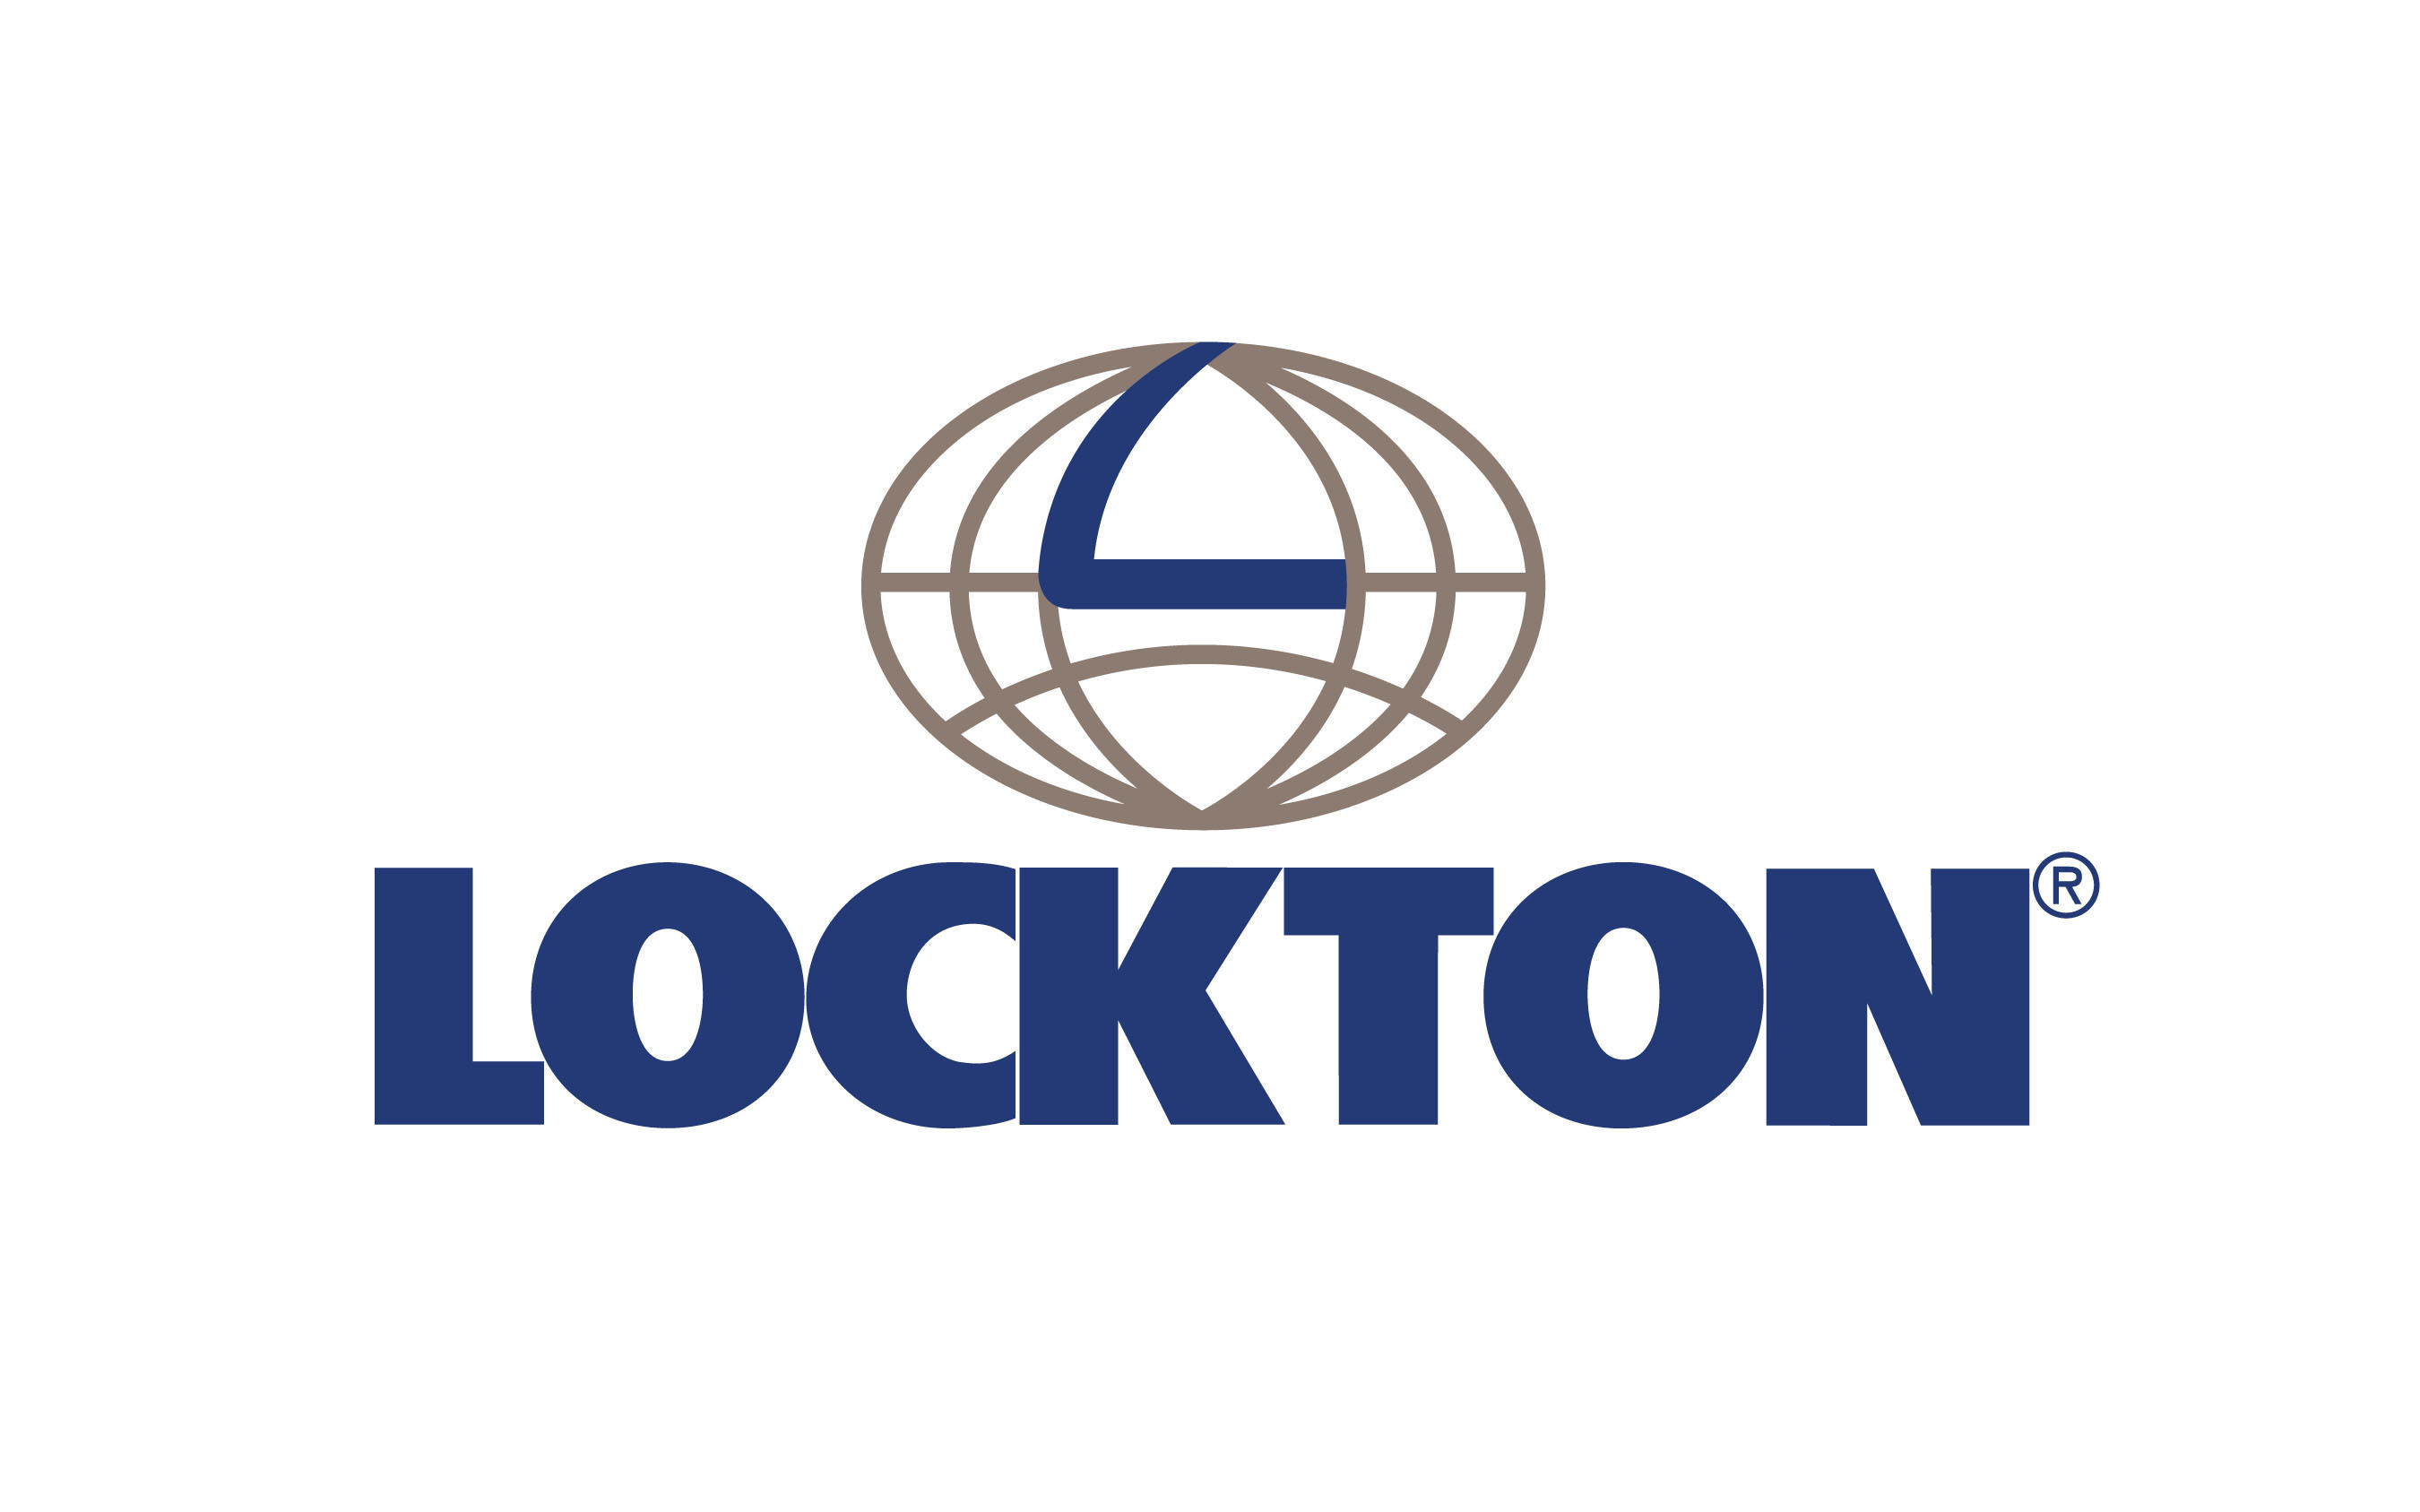 Lockton names Marsh’s Andy Conti as SVP, Complex Casualty